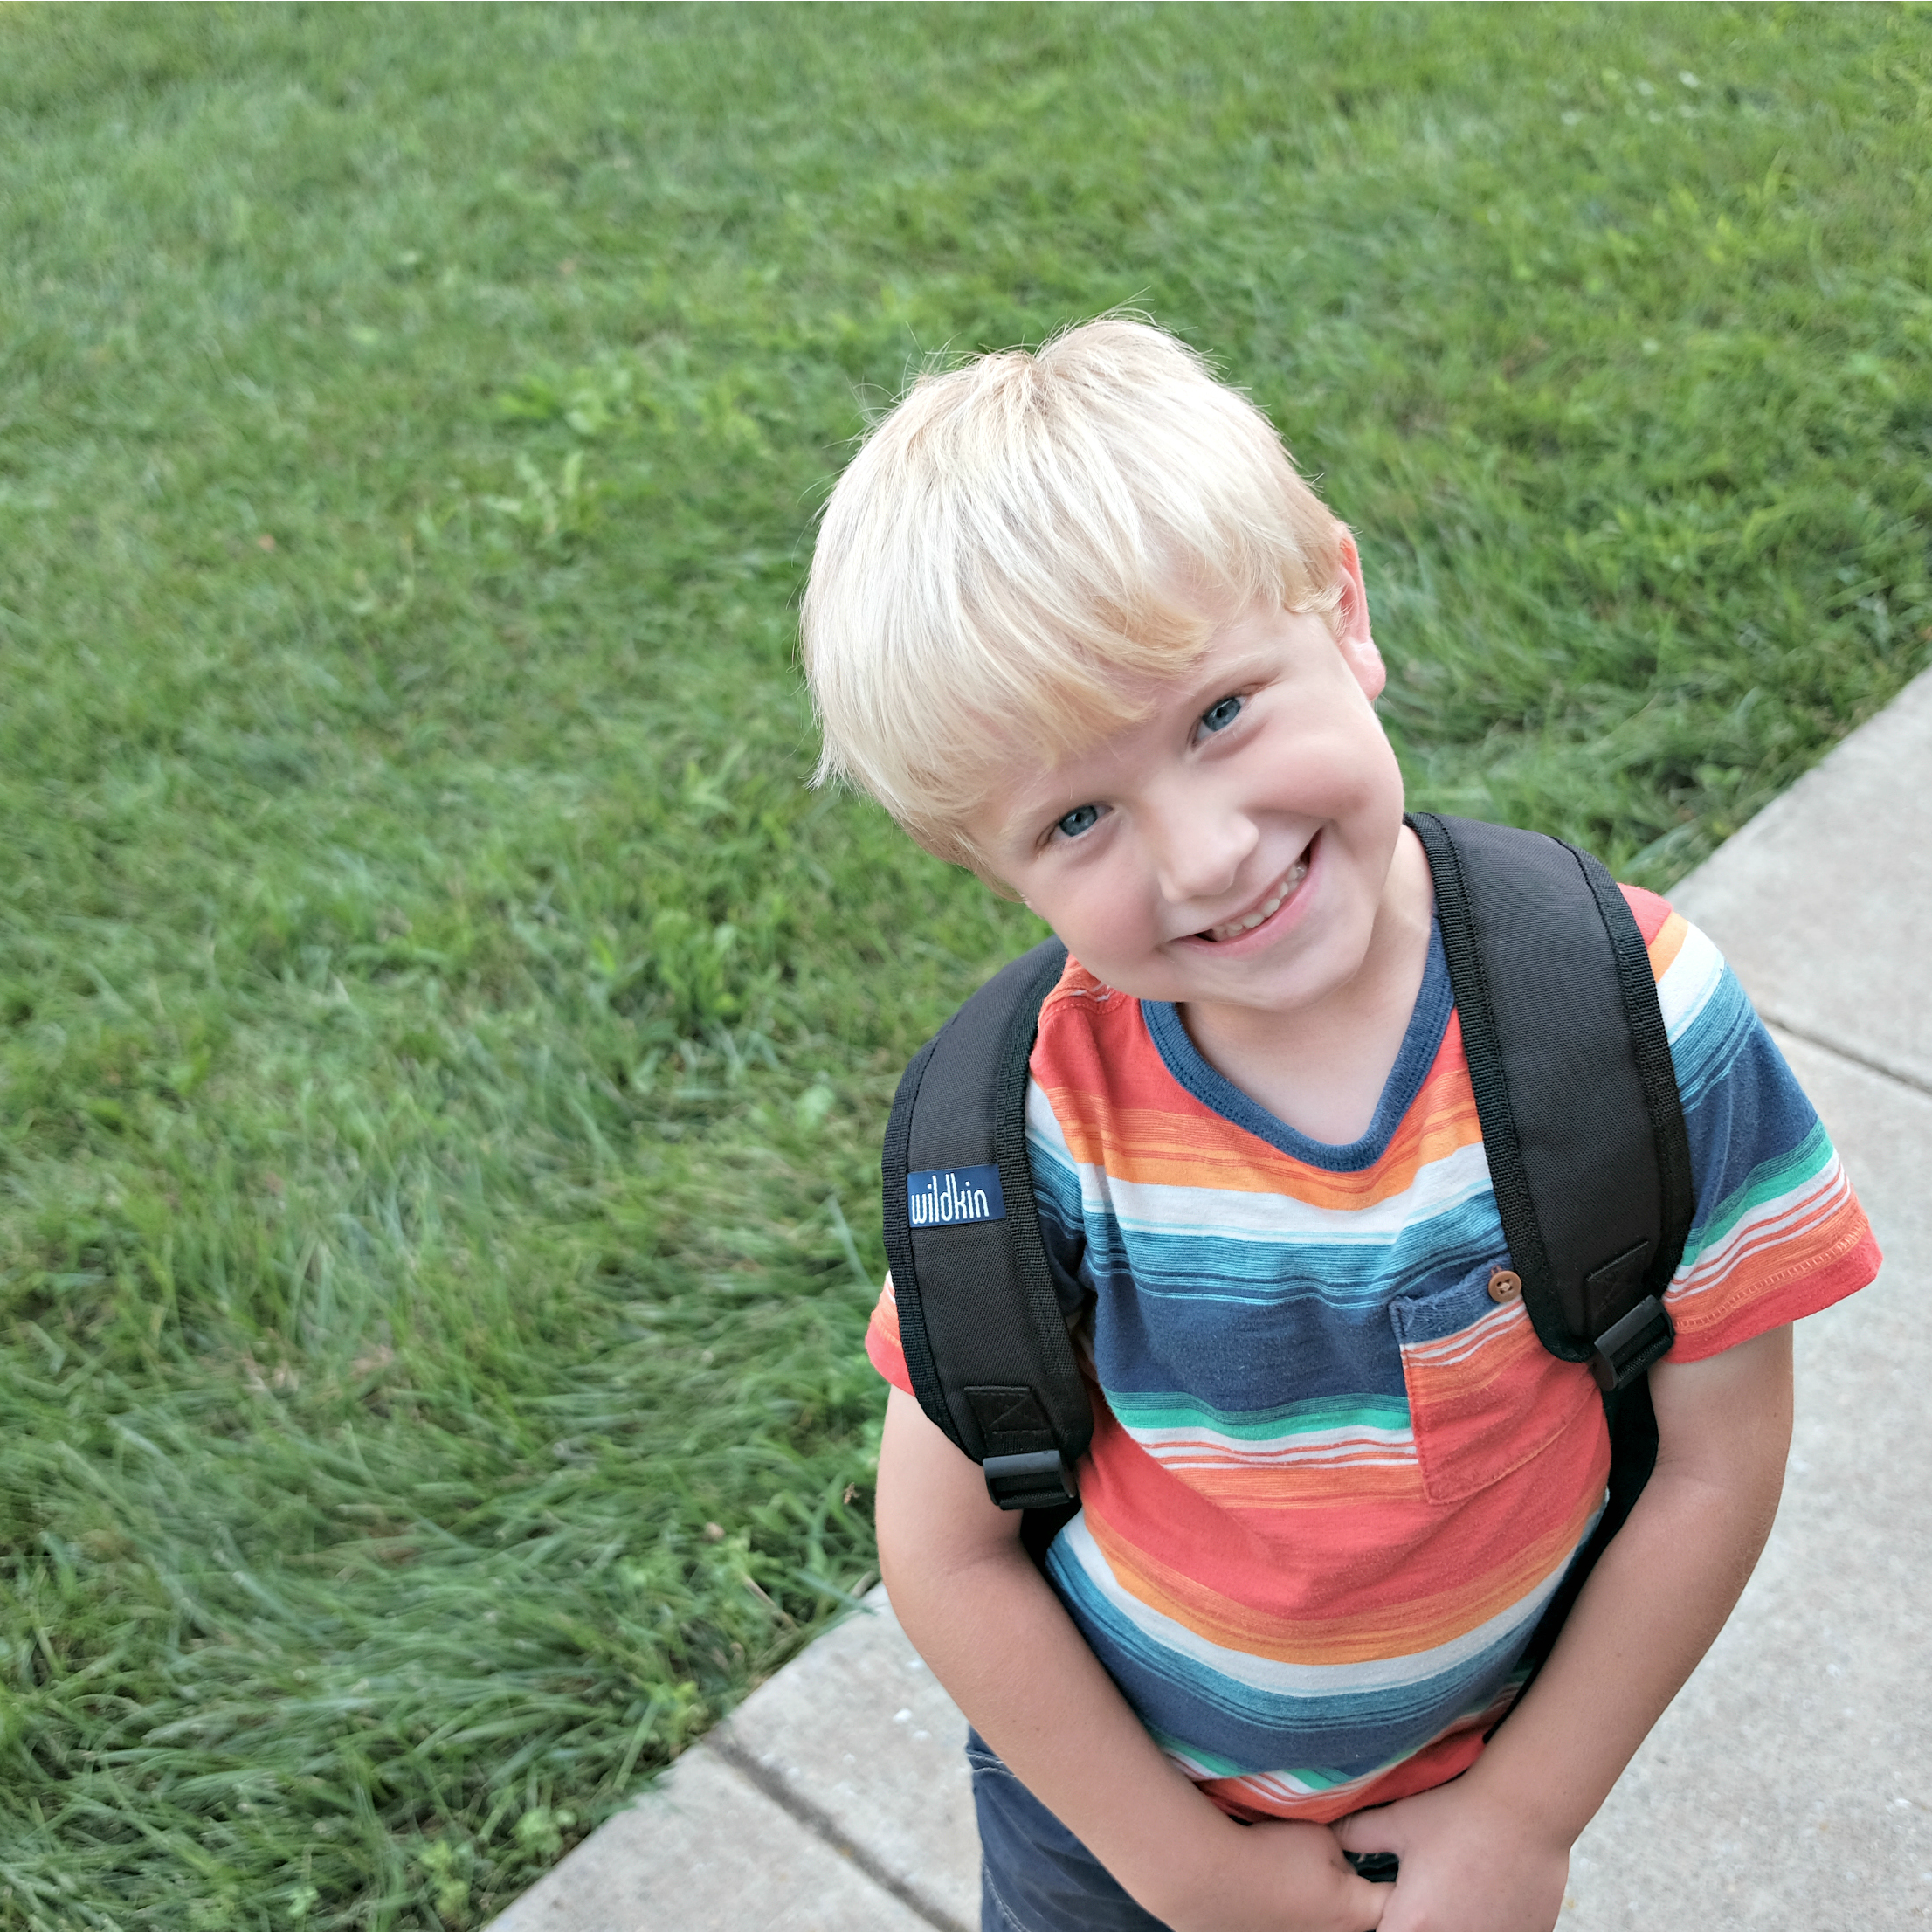 A Letter to My Child on the First Day of Kindergarten